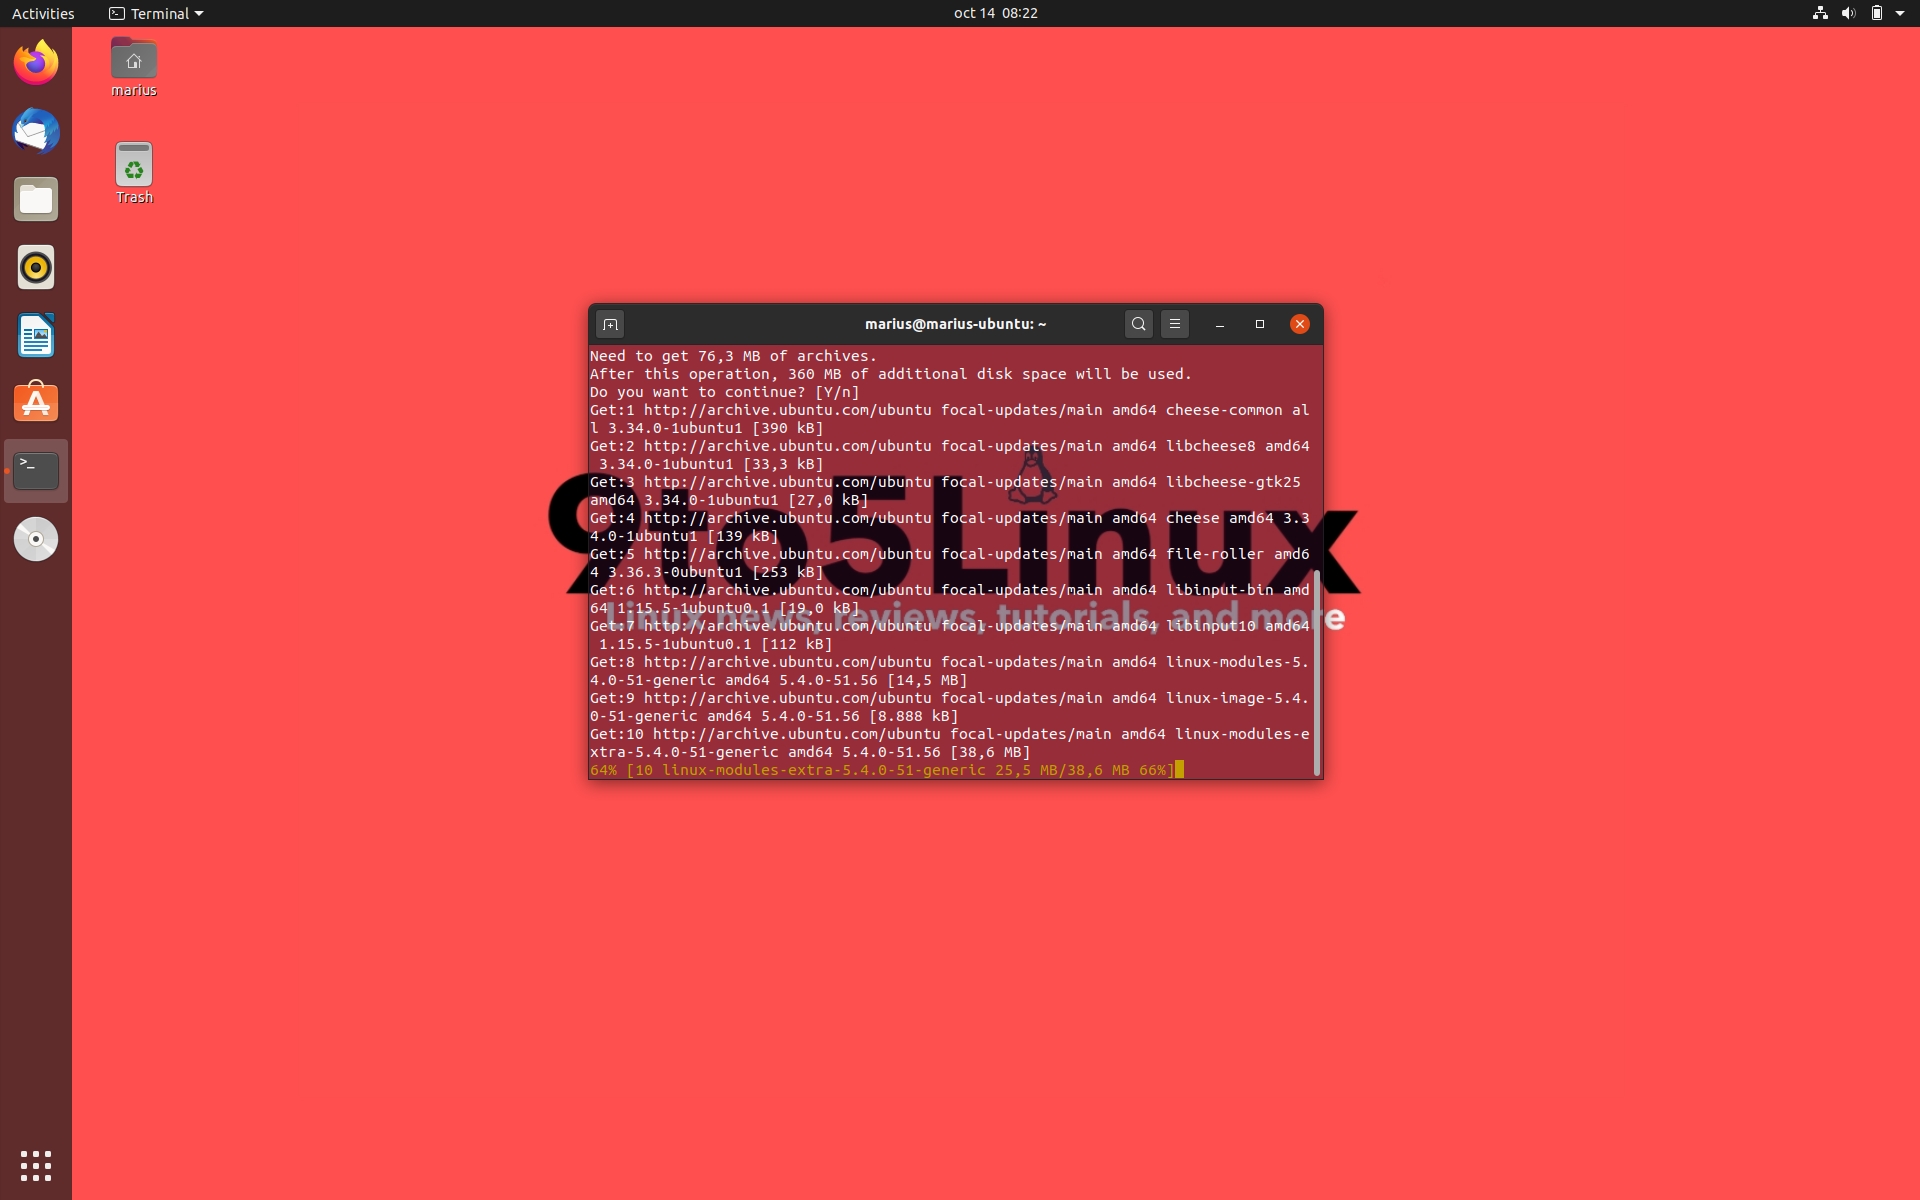 Canonical Releases New Ubuntu Kernel Security Updates to Patch 10 Vulnerabilities